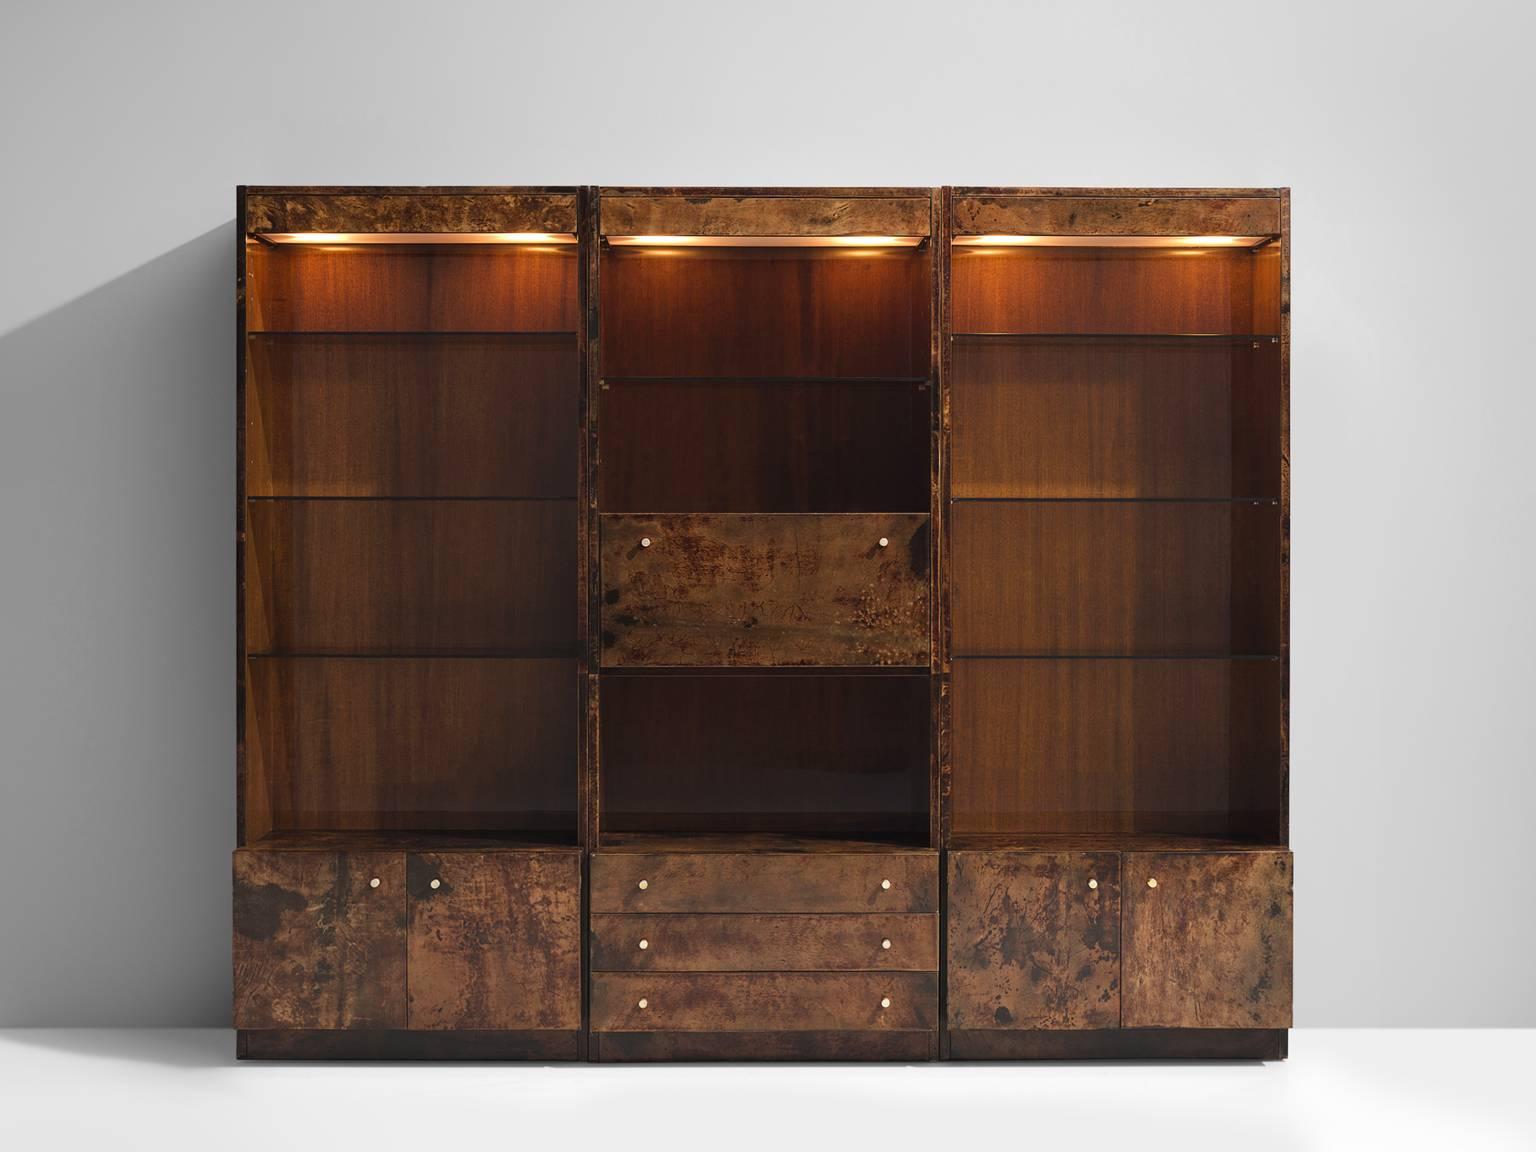 Cabinet, wood lacquered goatskin, Italy, 1940s

This Italian chest is highly elegant and refined and is part of the midcentury design collection by Morentz. The panels, handles, and patterned doors are all exquisitely produced. There are closed